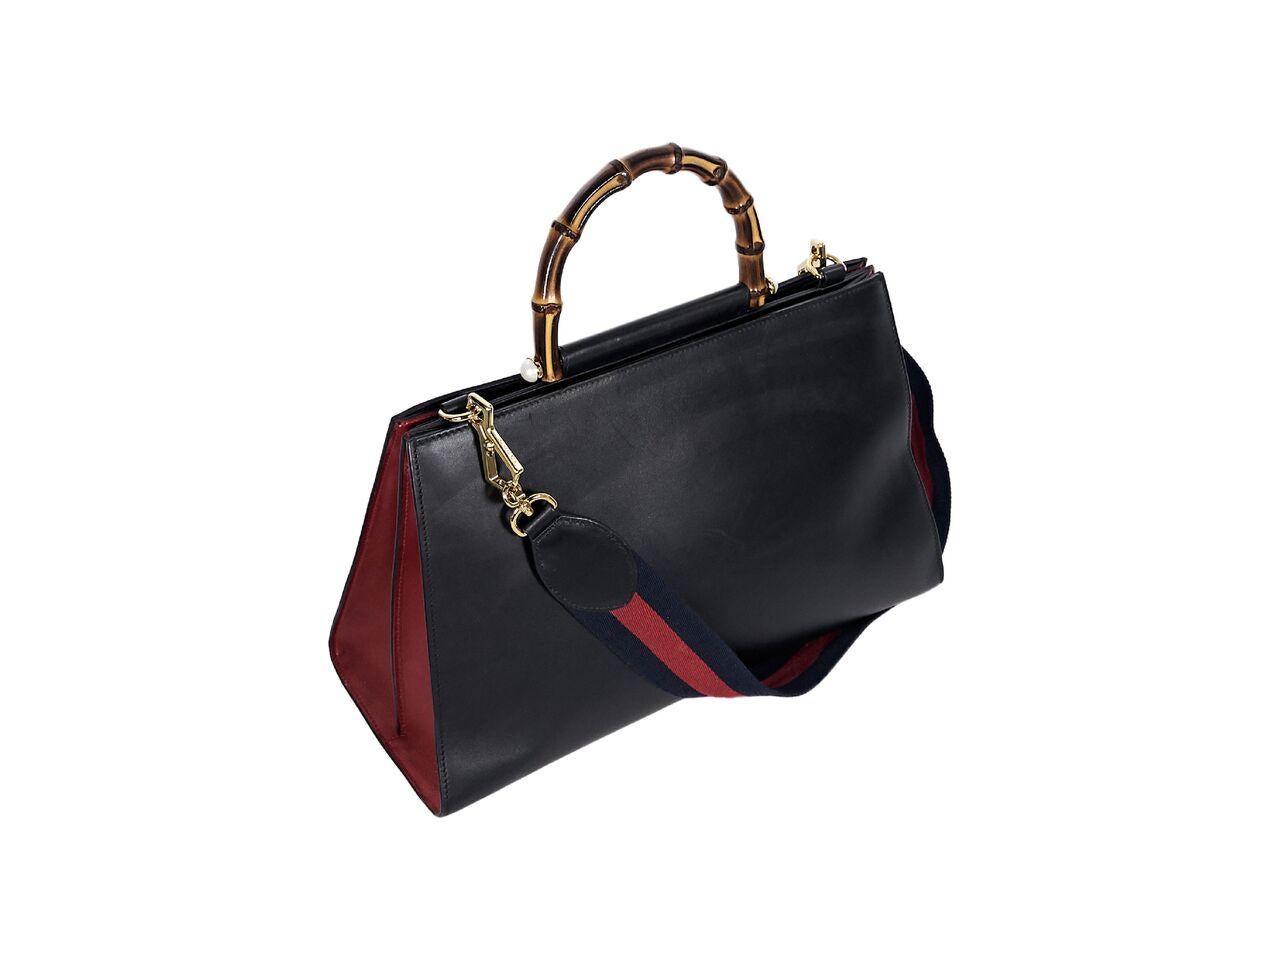 Product details:  Black and red leather Nymphea satchel by Gucci.  Top bamboo handle.  Detachable shoulder strap.  Concealed magnetic closure.  Lined interior with inner zip and slide pockets.  Goldtone hardware.  13.5